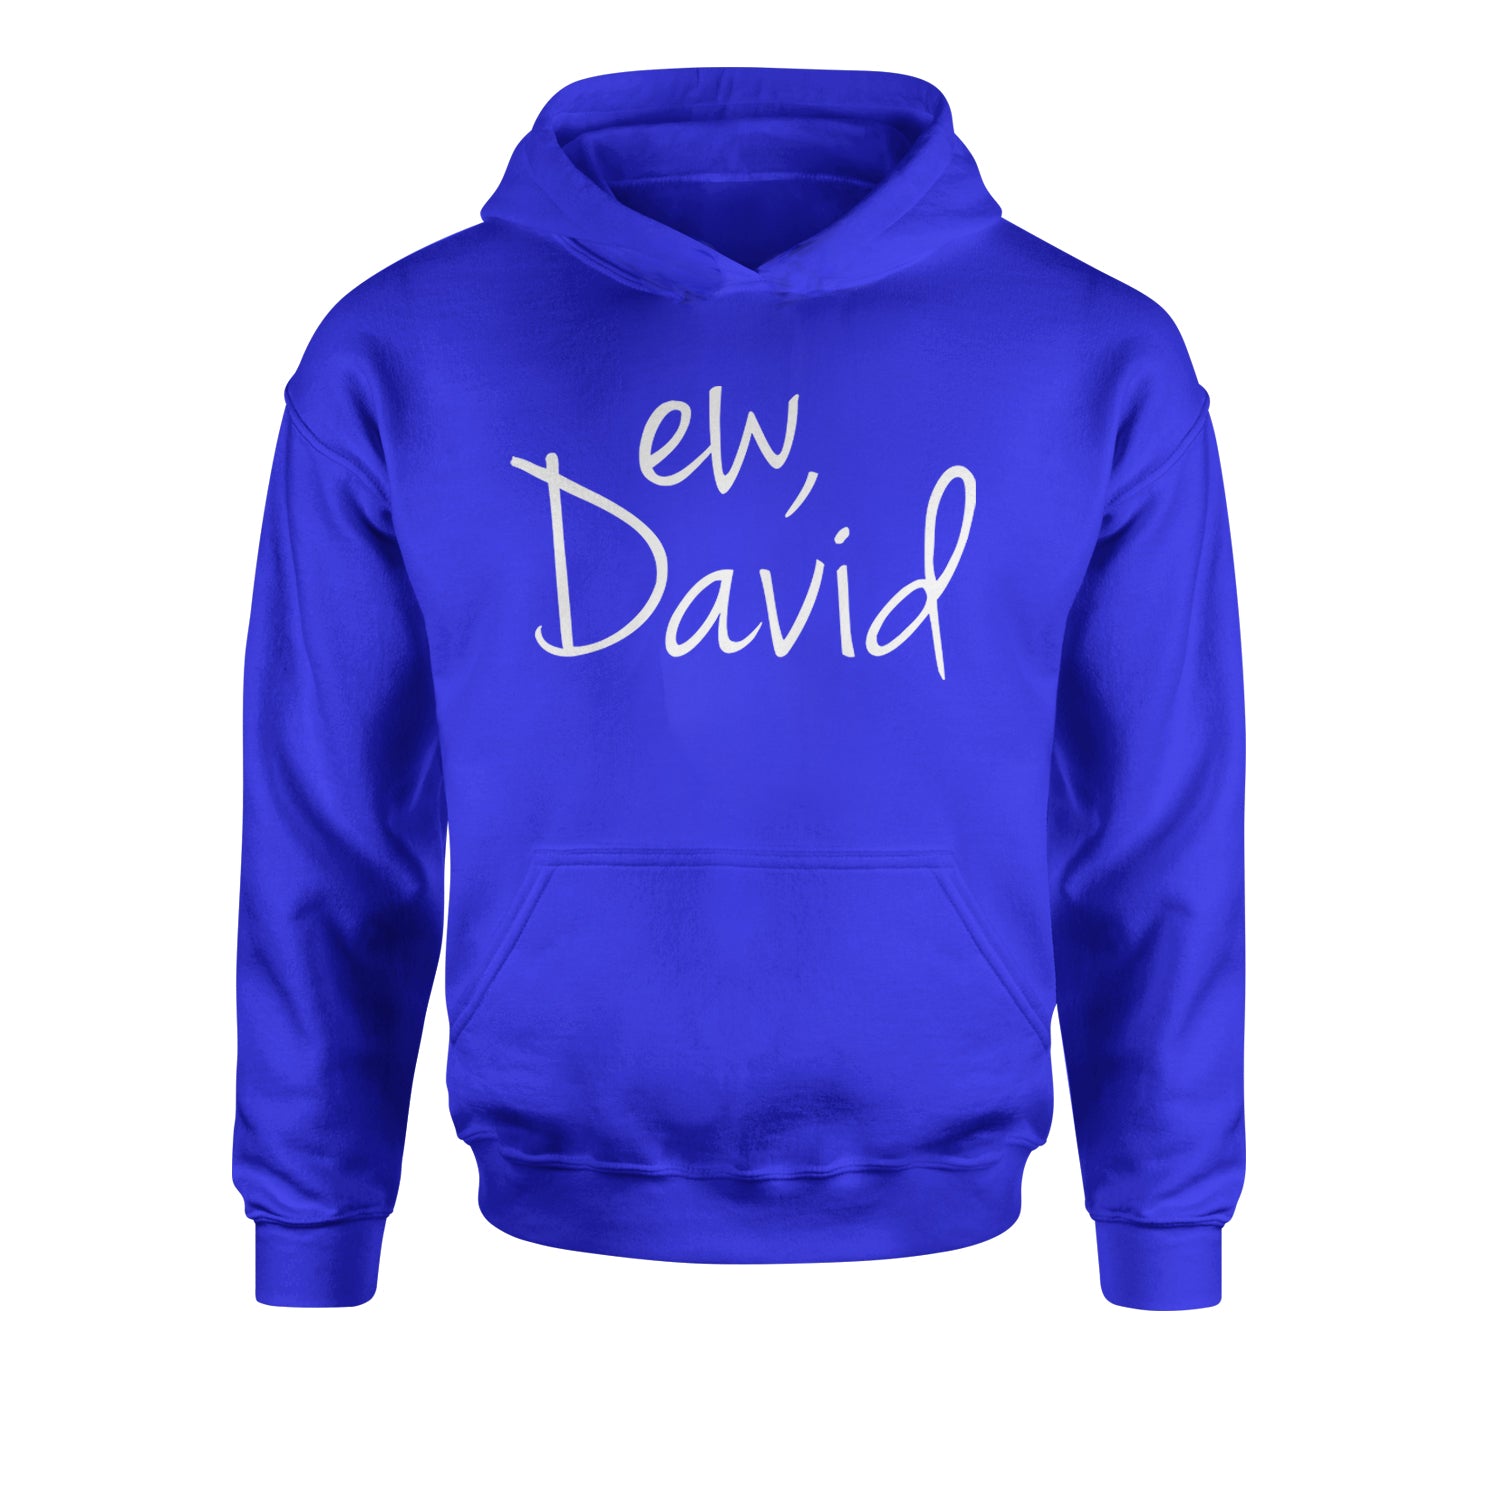 Ew, David Funny Creek TV Show Youth-Sized Hoodie alexis, bit, david, eugene, levy, little, nonchalance, schitt by Expression Tees